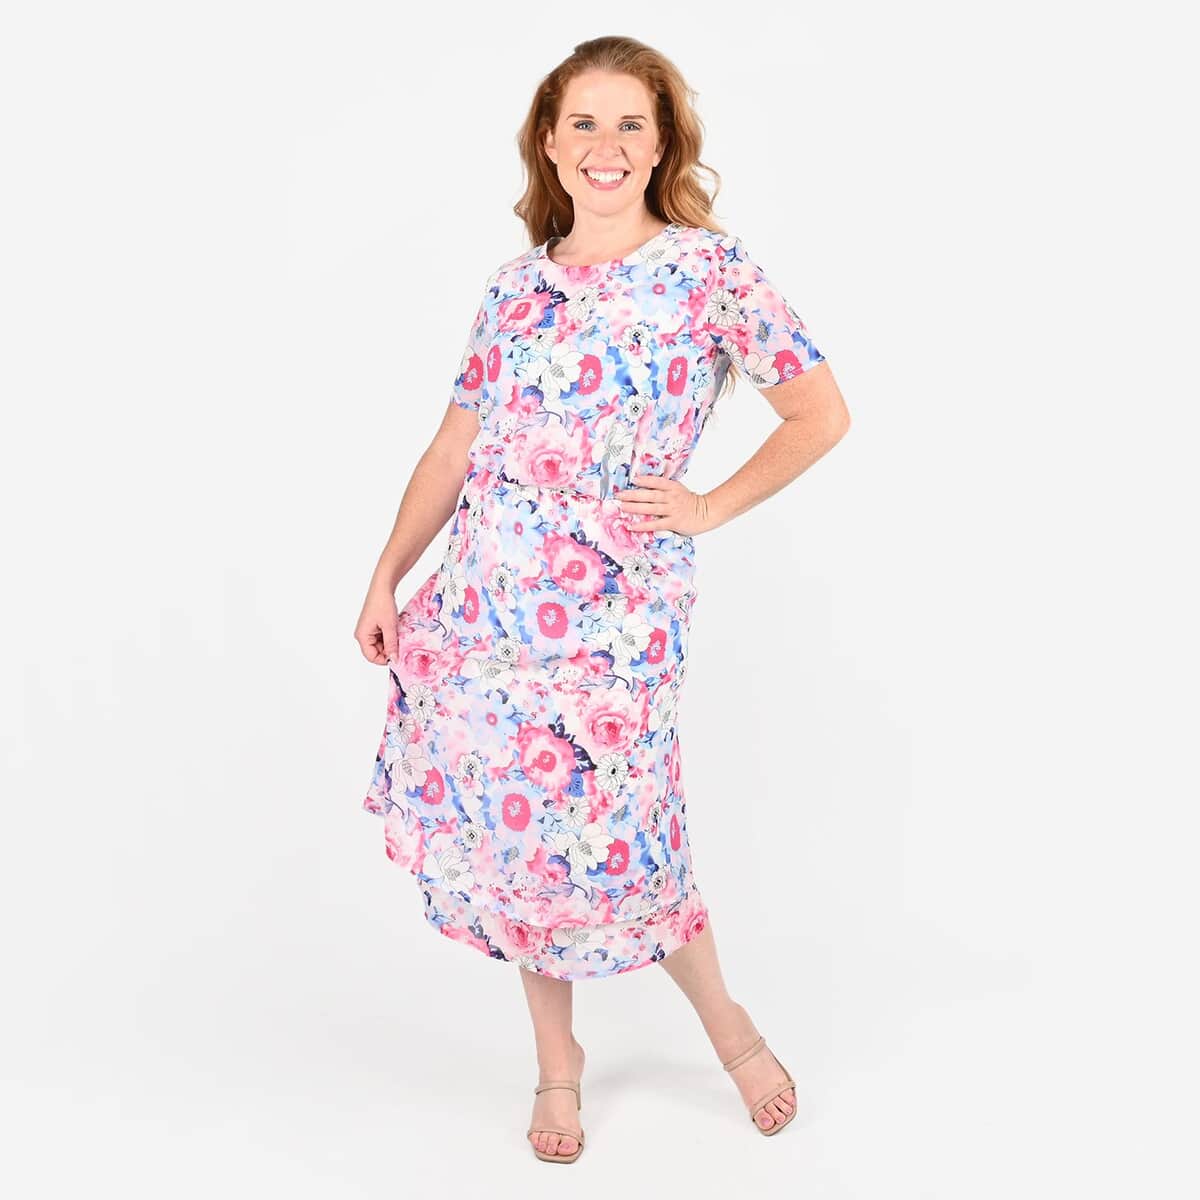 Tamsy Pink Floral 2-piece Chiffon Skirt Set - 1X image number 0